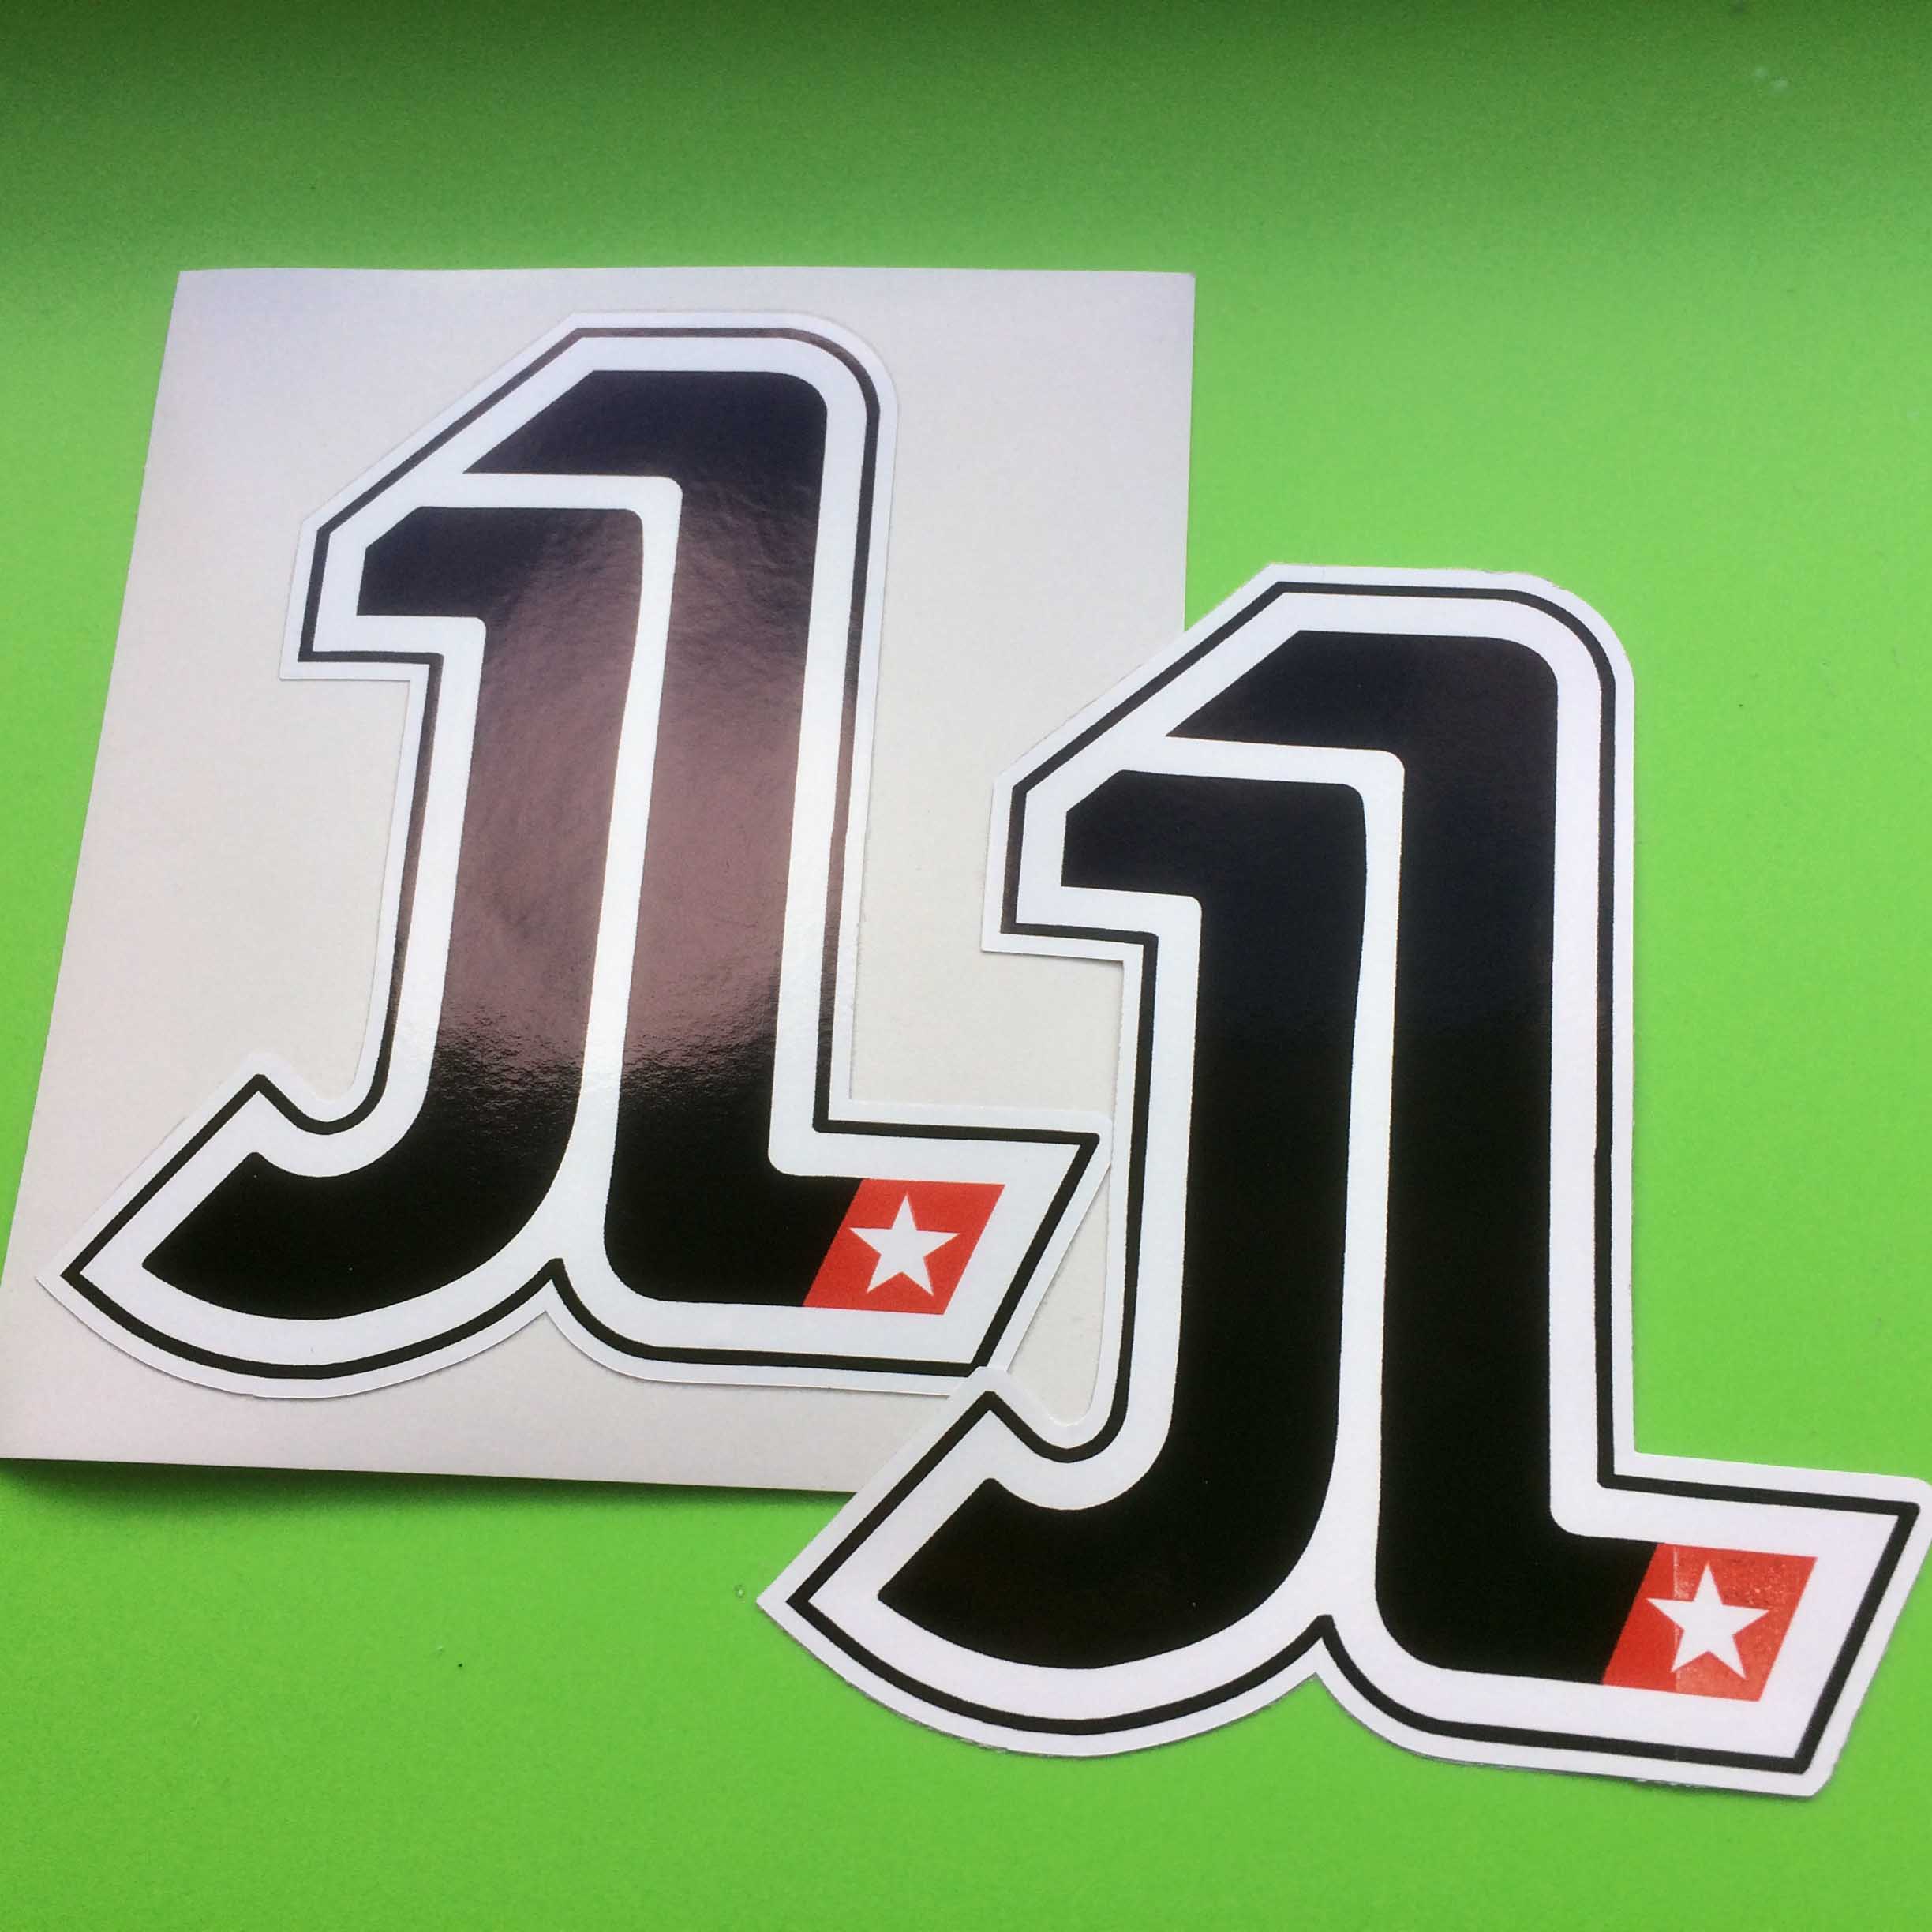 JORGE LORENZO MOTO GP STICKERS. JL in bold black letters. The base of the L is partially red with a white star on it.